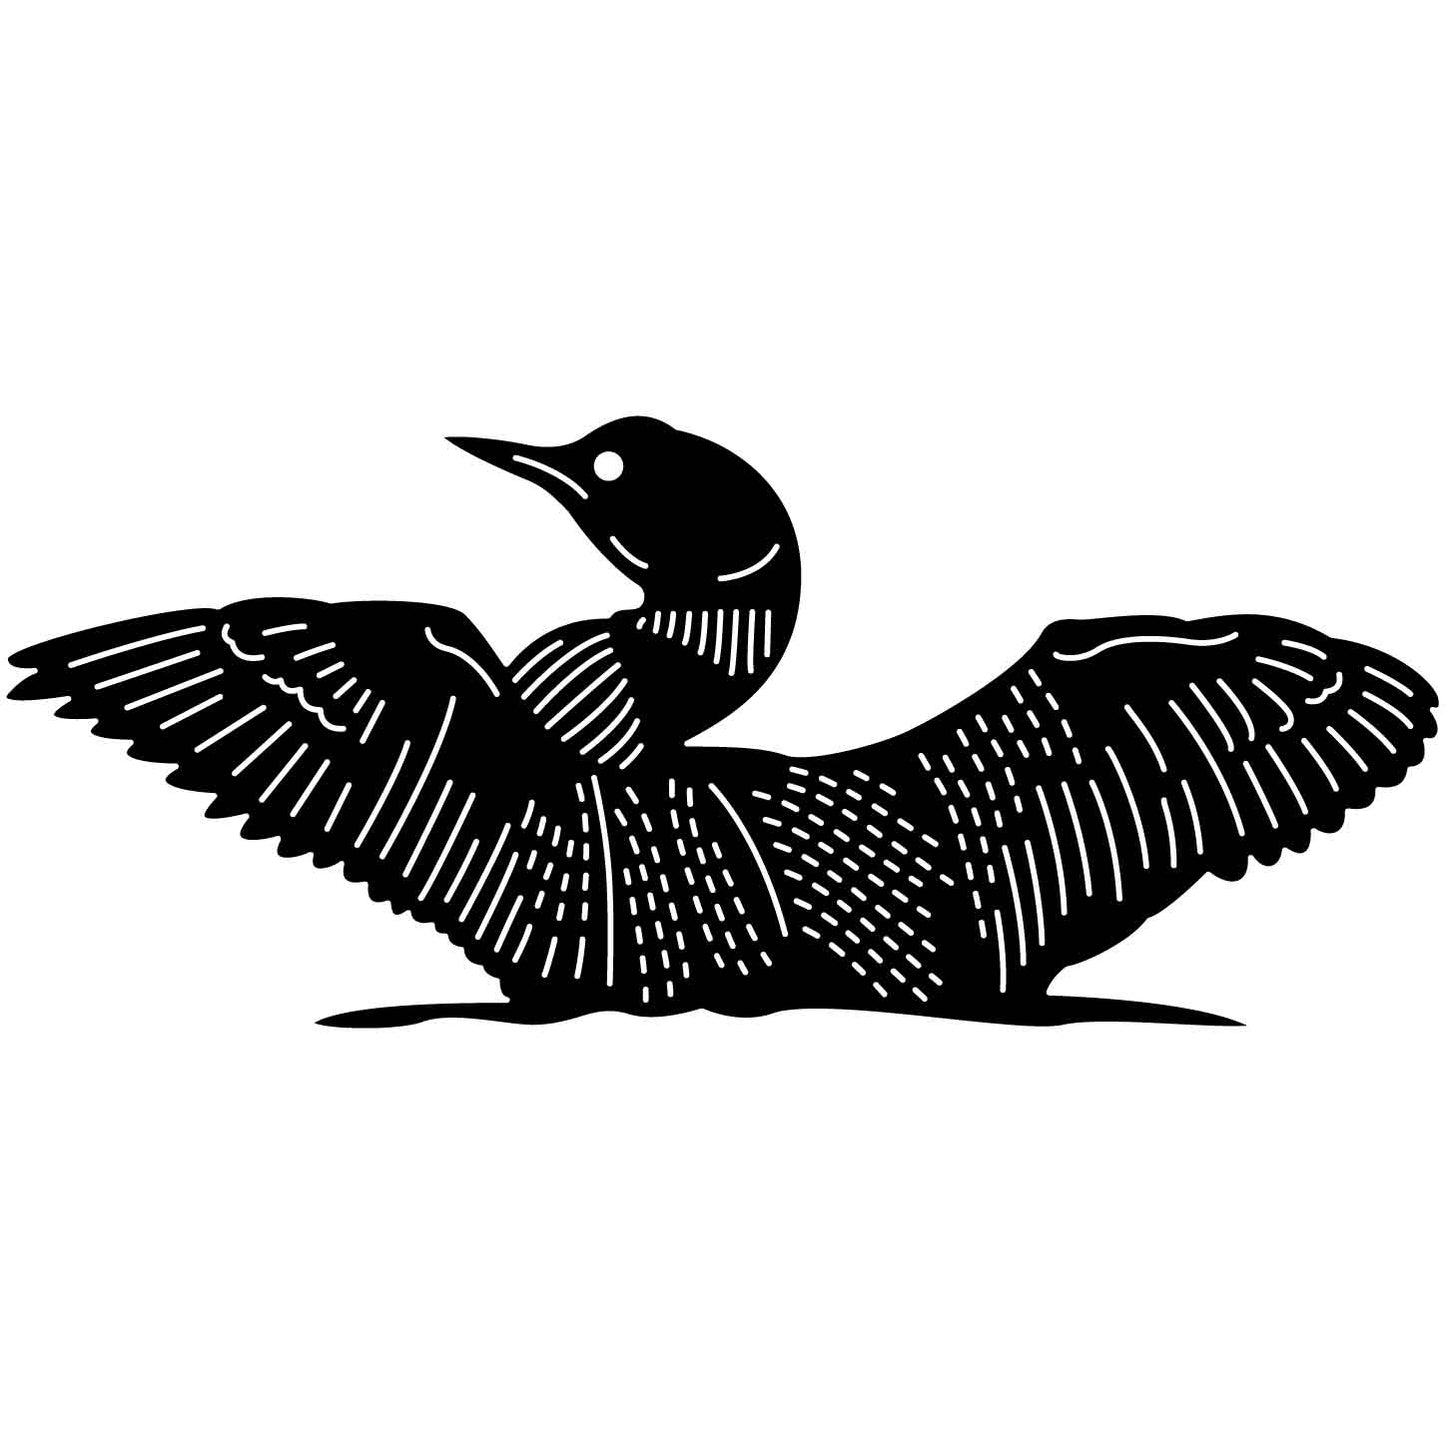 Loons in Lake-DXF File Cut Ready for cnc machines-DXFforCNC.com